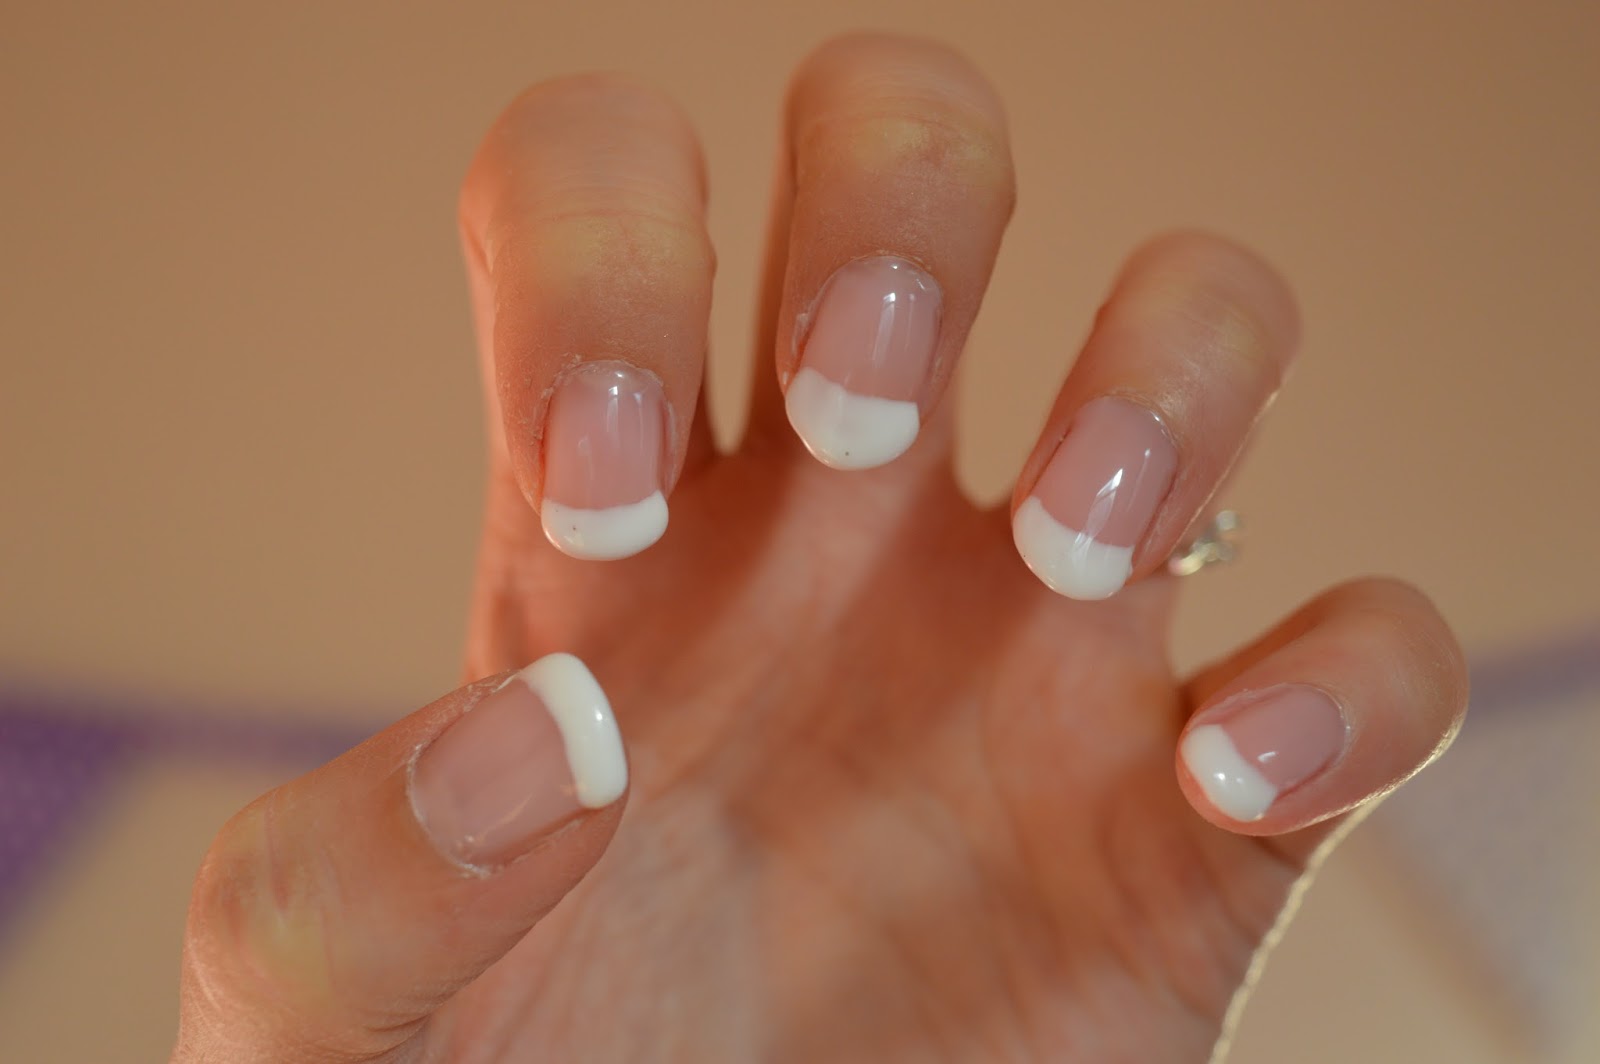 The Colour UK Beauty Blog: Nail of the Day: Sheer French Manicure